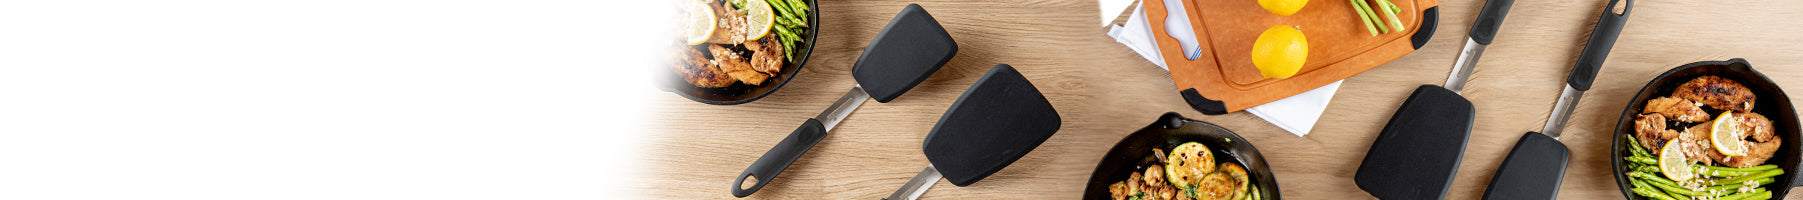 Banner_Smallwares_Kitchen-Tools_Turners_189